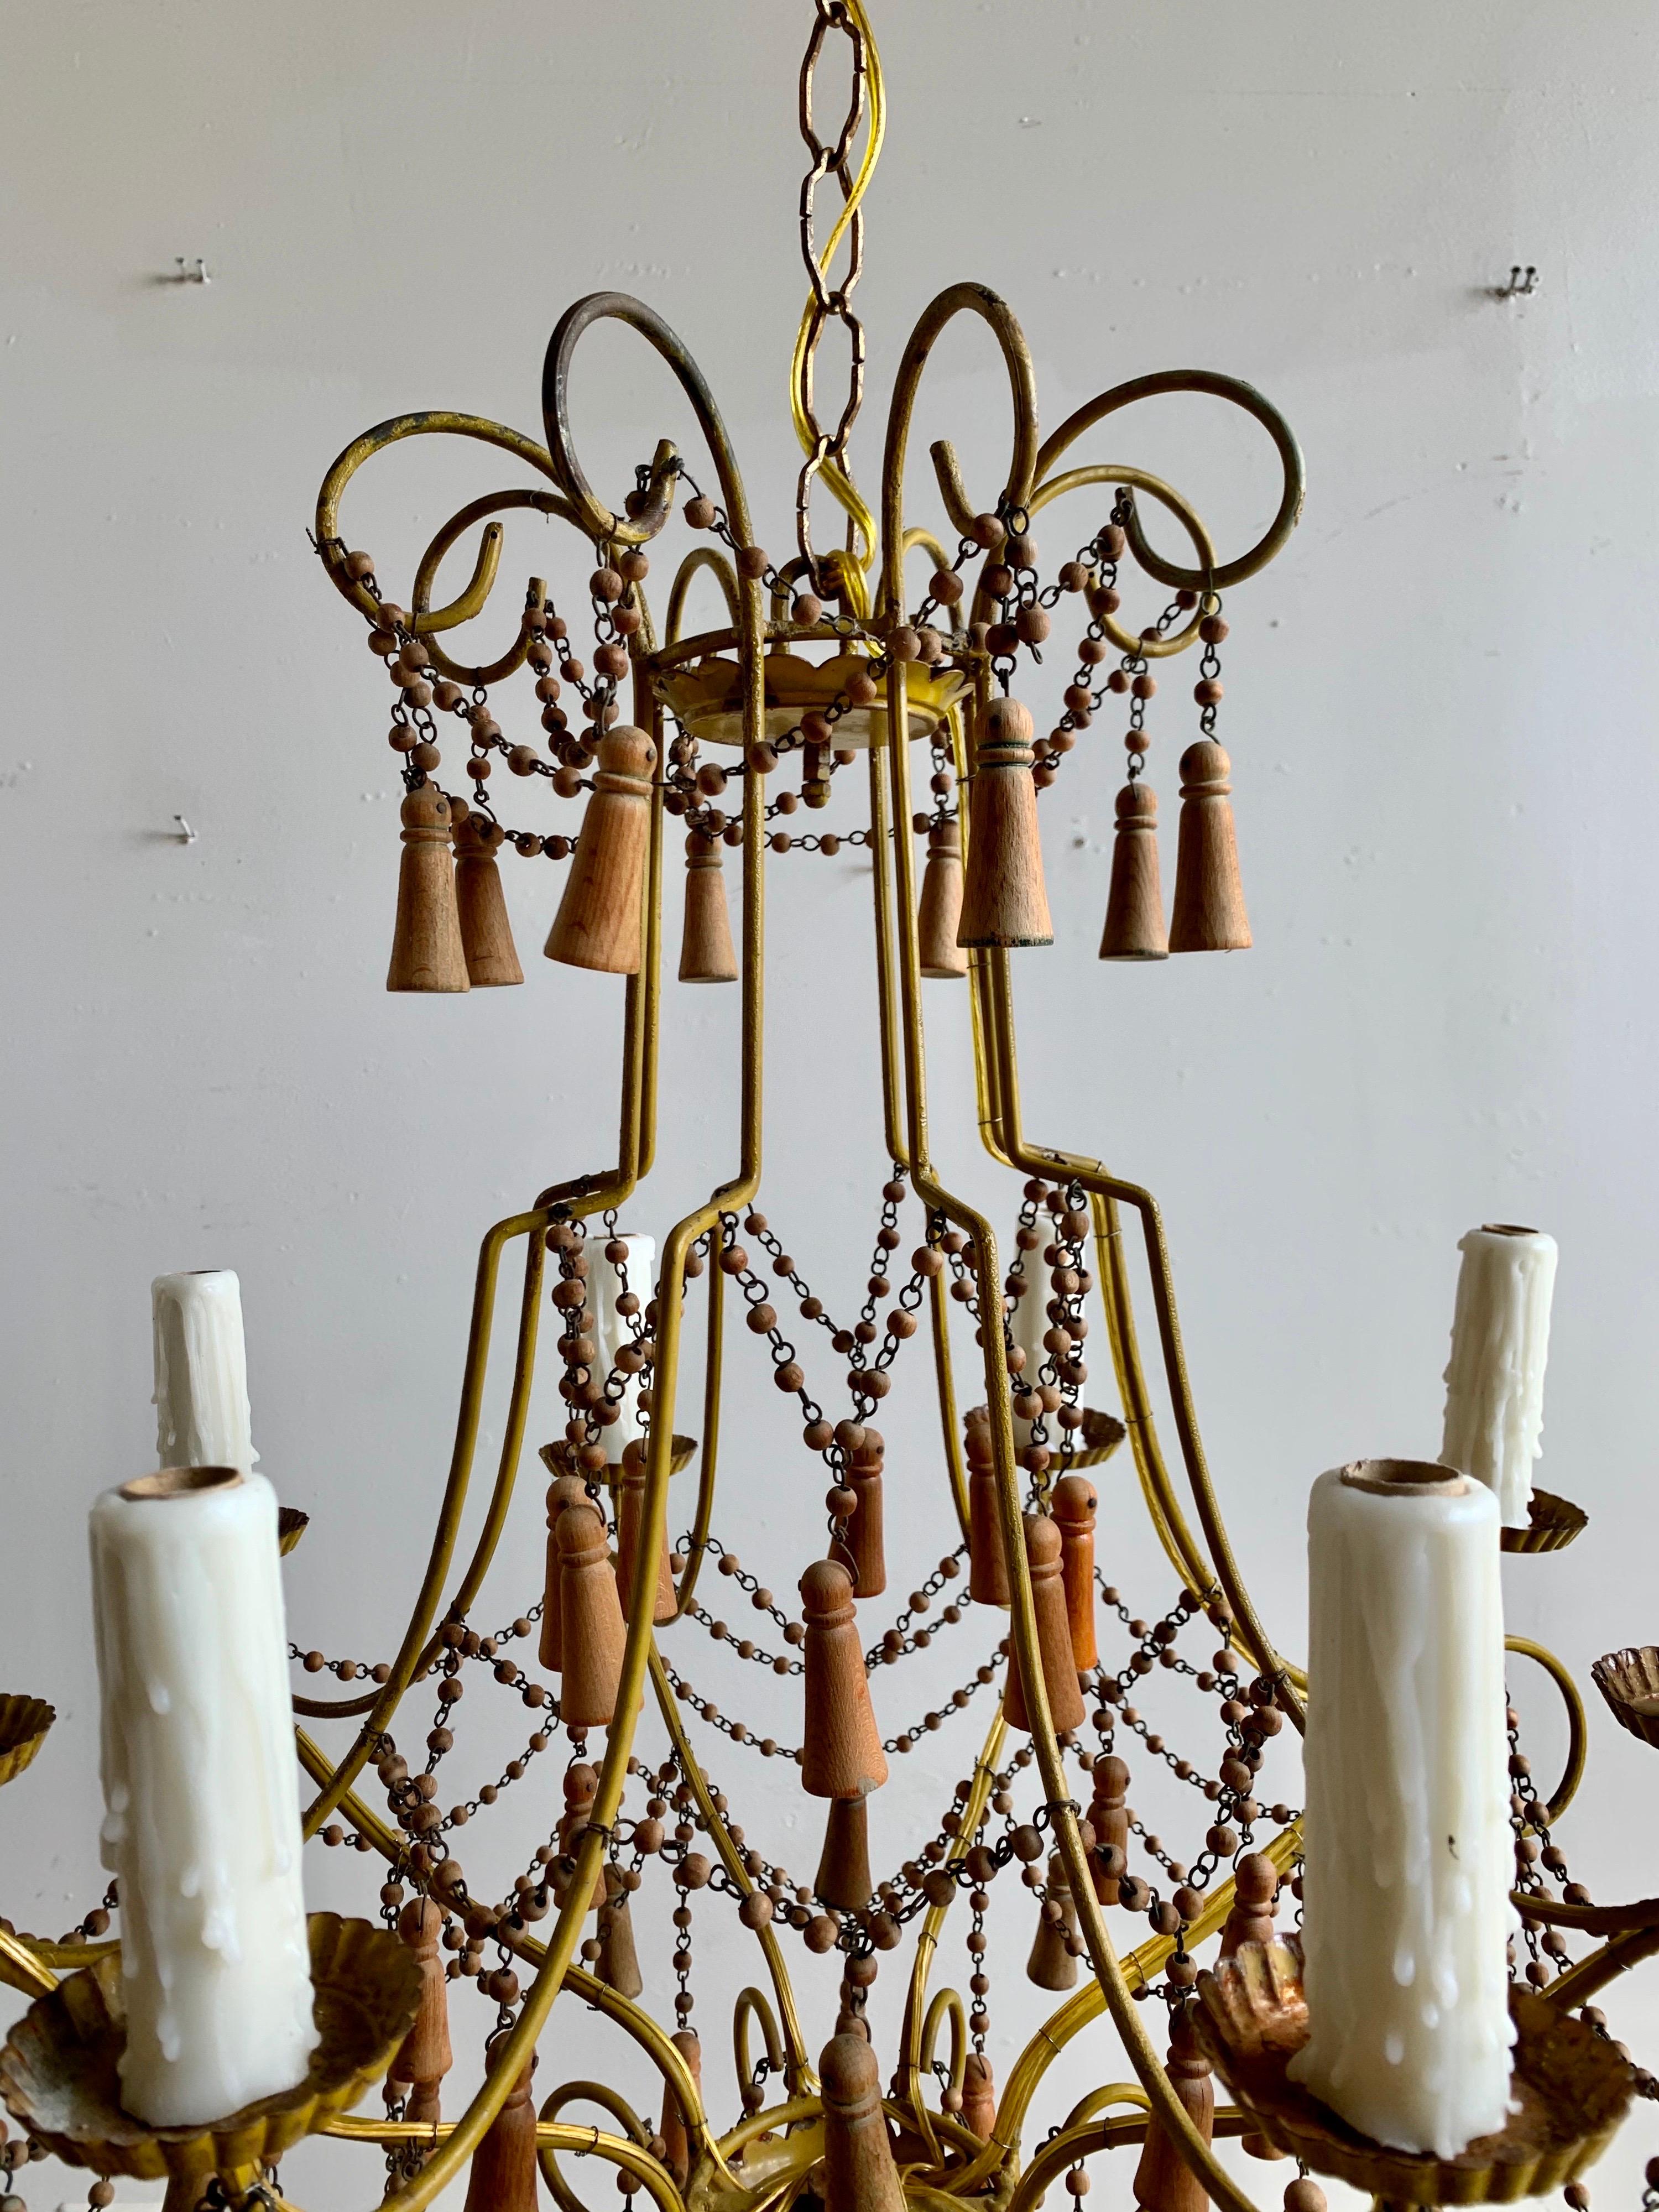 Italian eight light chandelier with wood beaded tassels throughout. The fixture is newly rewired with drip wax candle covers and includes chain and canopy.